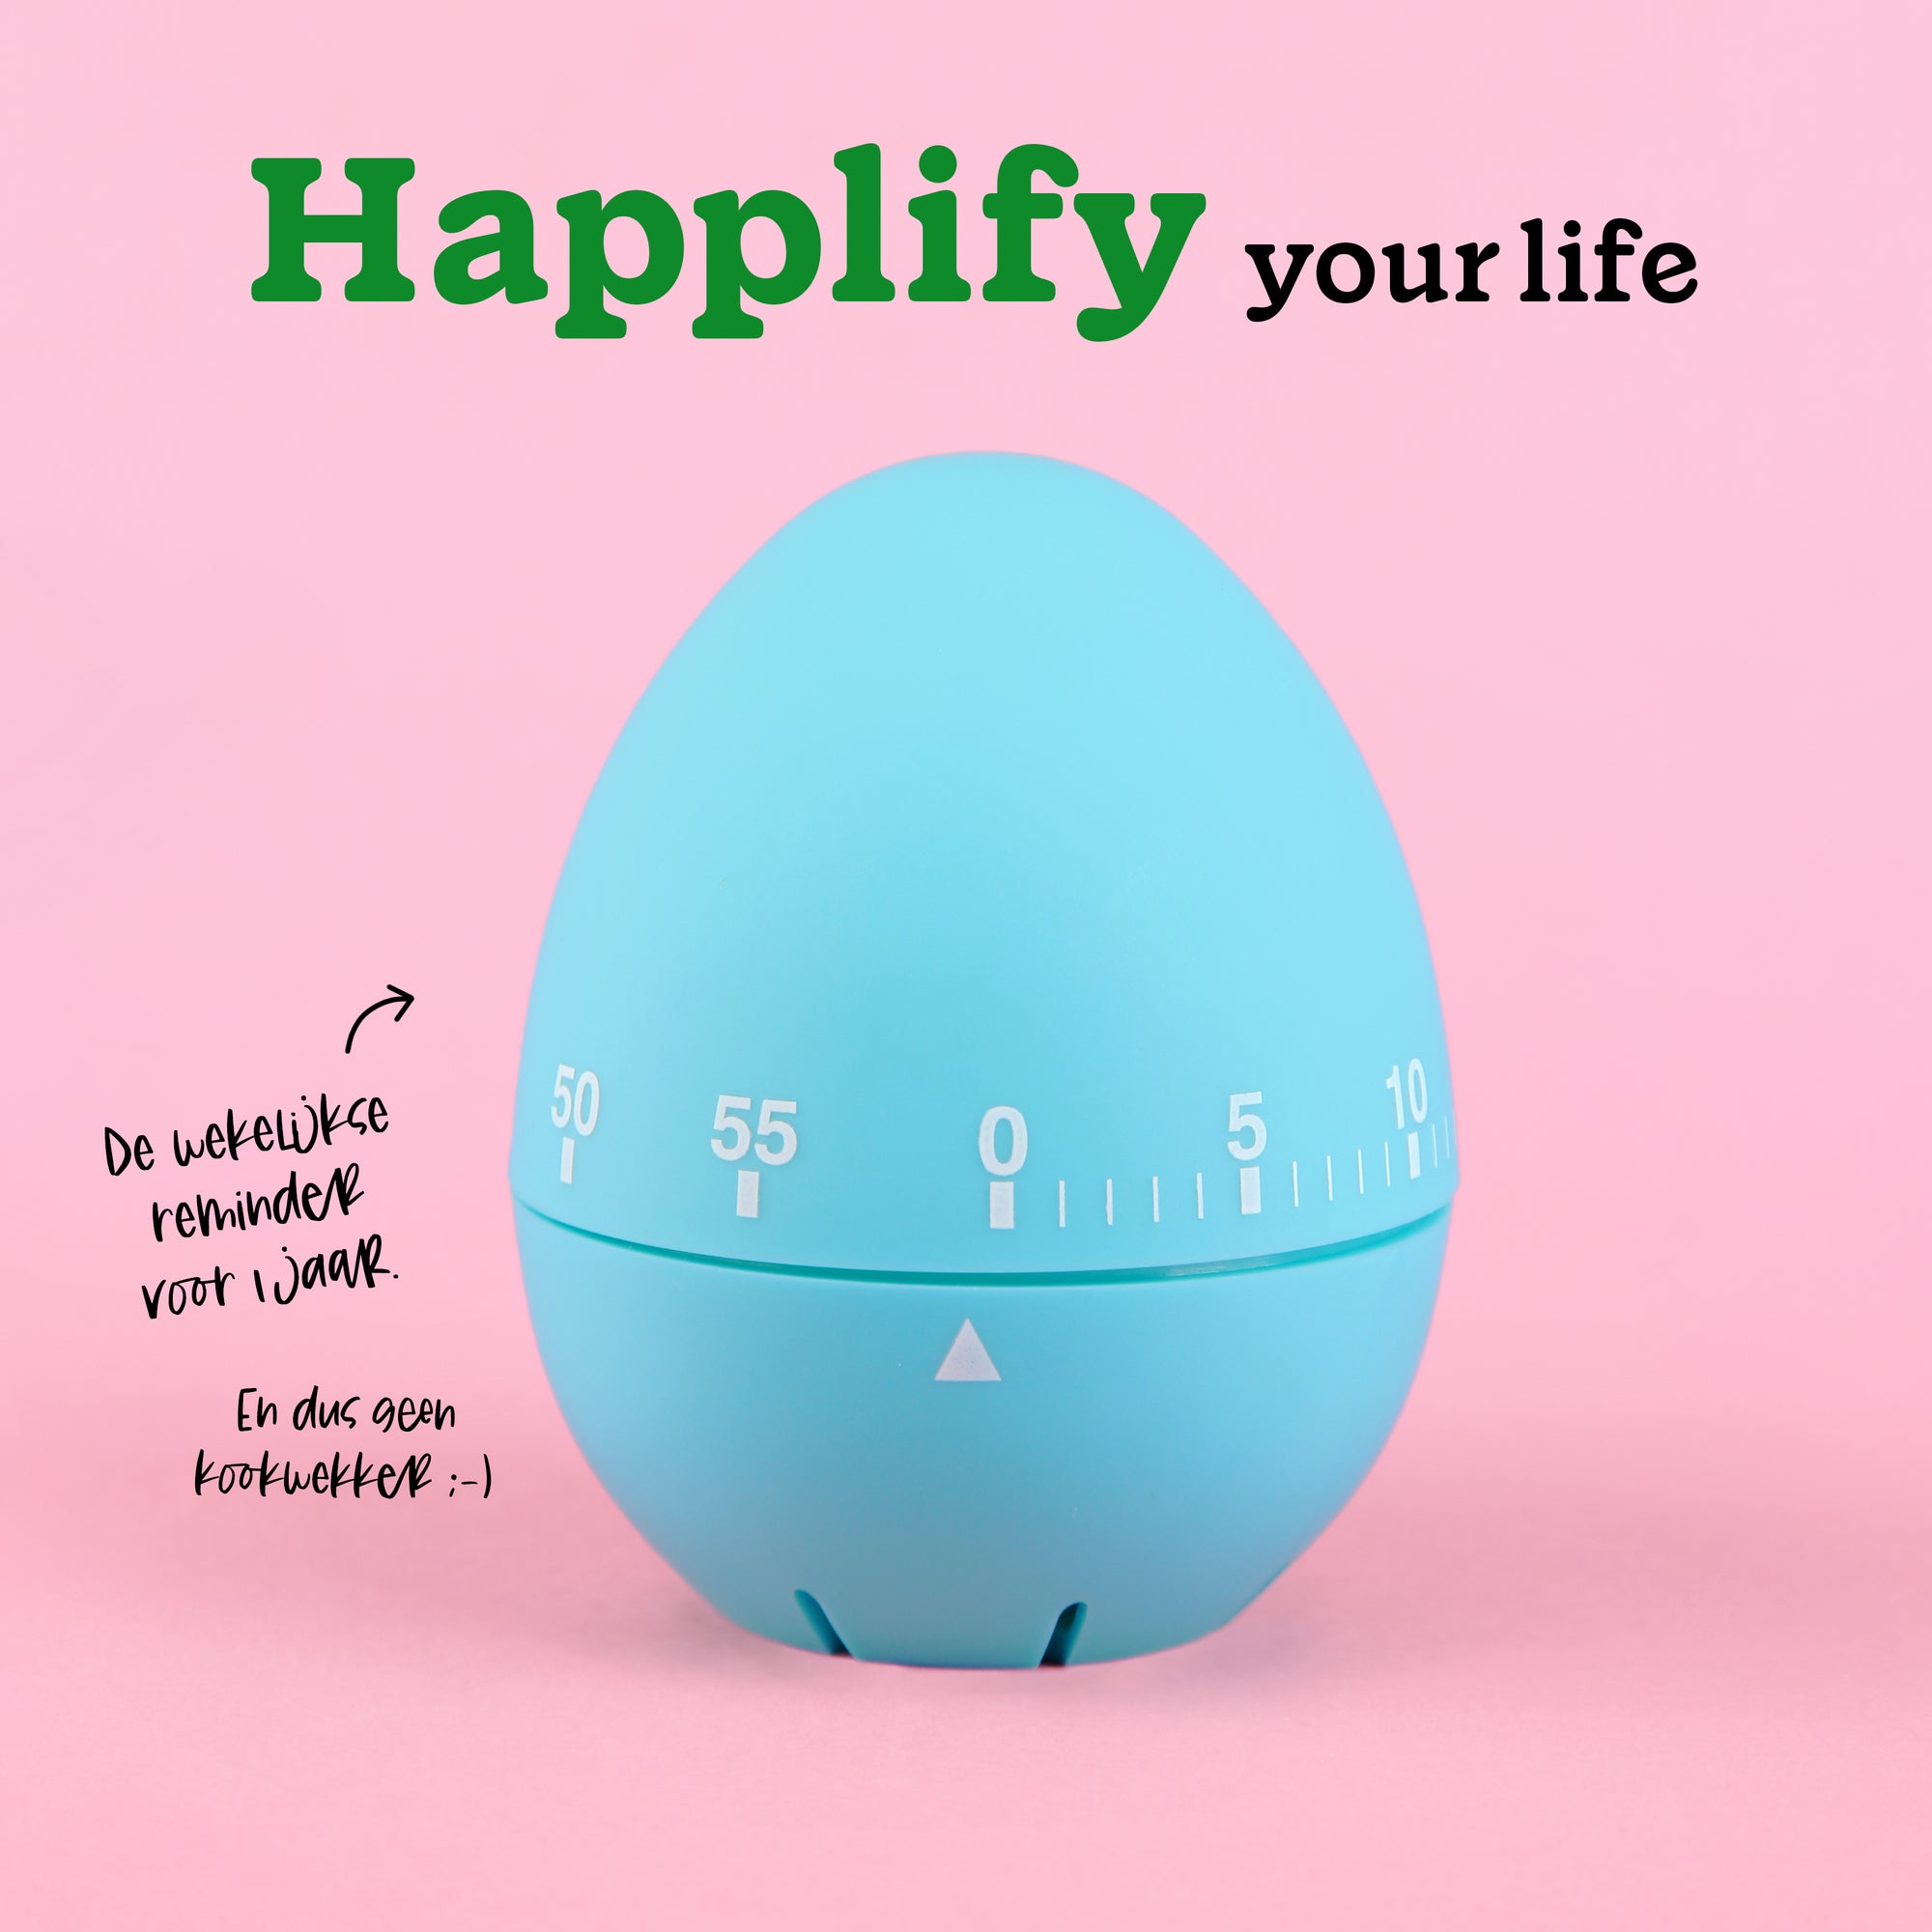 Happlify your life - Reminder - Happlify